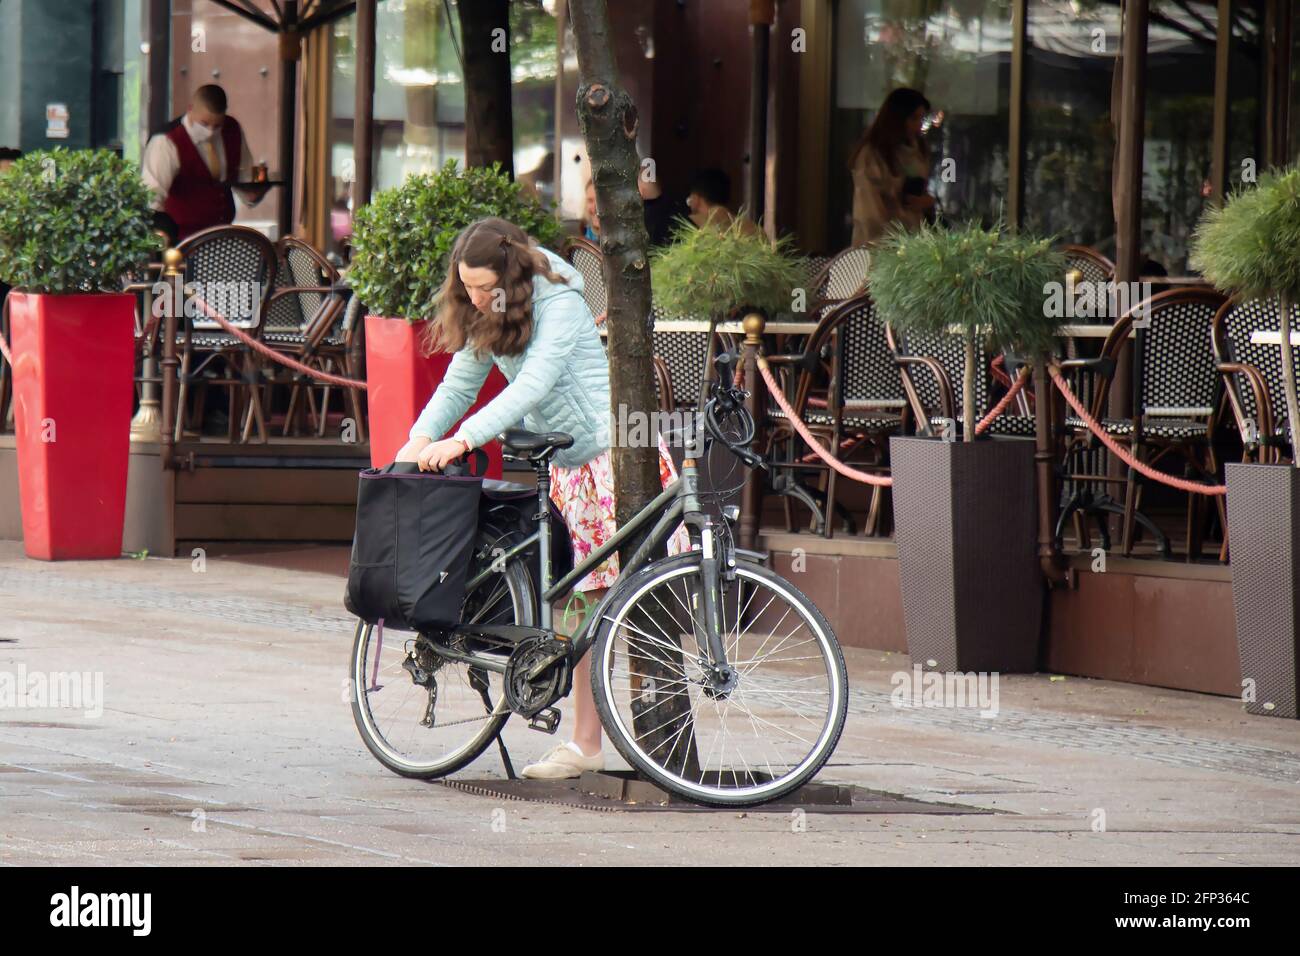 Belgrade, Serbia - May 13, 2021: One young woman packing double panniers bags on her parked  bike on a city street by the cafe terrasse Stock Photo